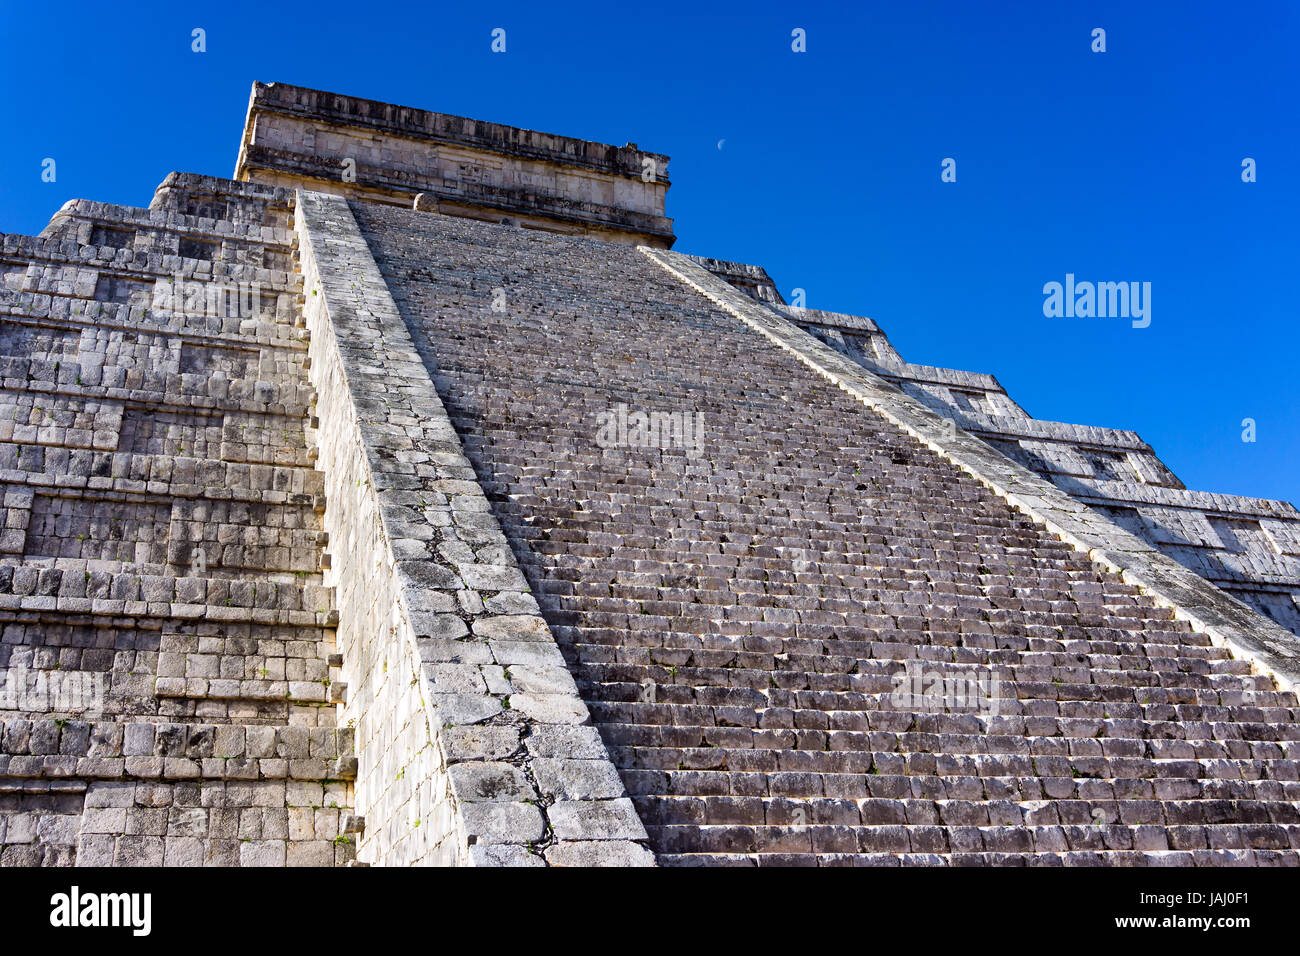 Stairs Leading Up The Pyramid Known As El Castillo In Chichen Itza Stock Photo Alamy